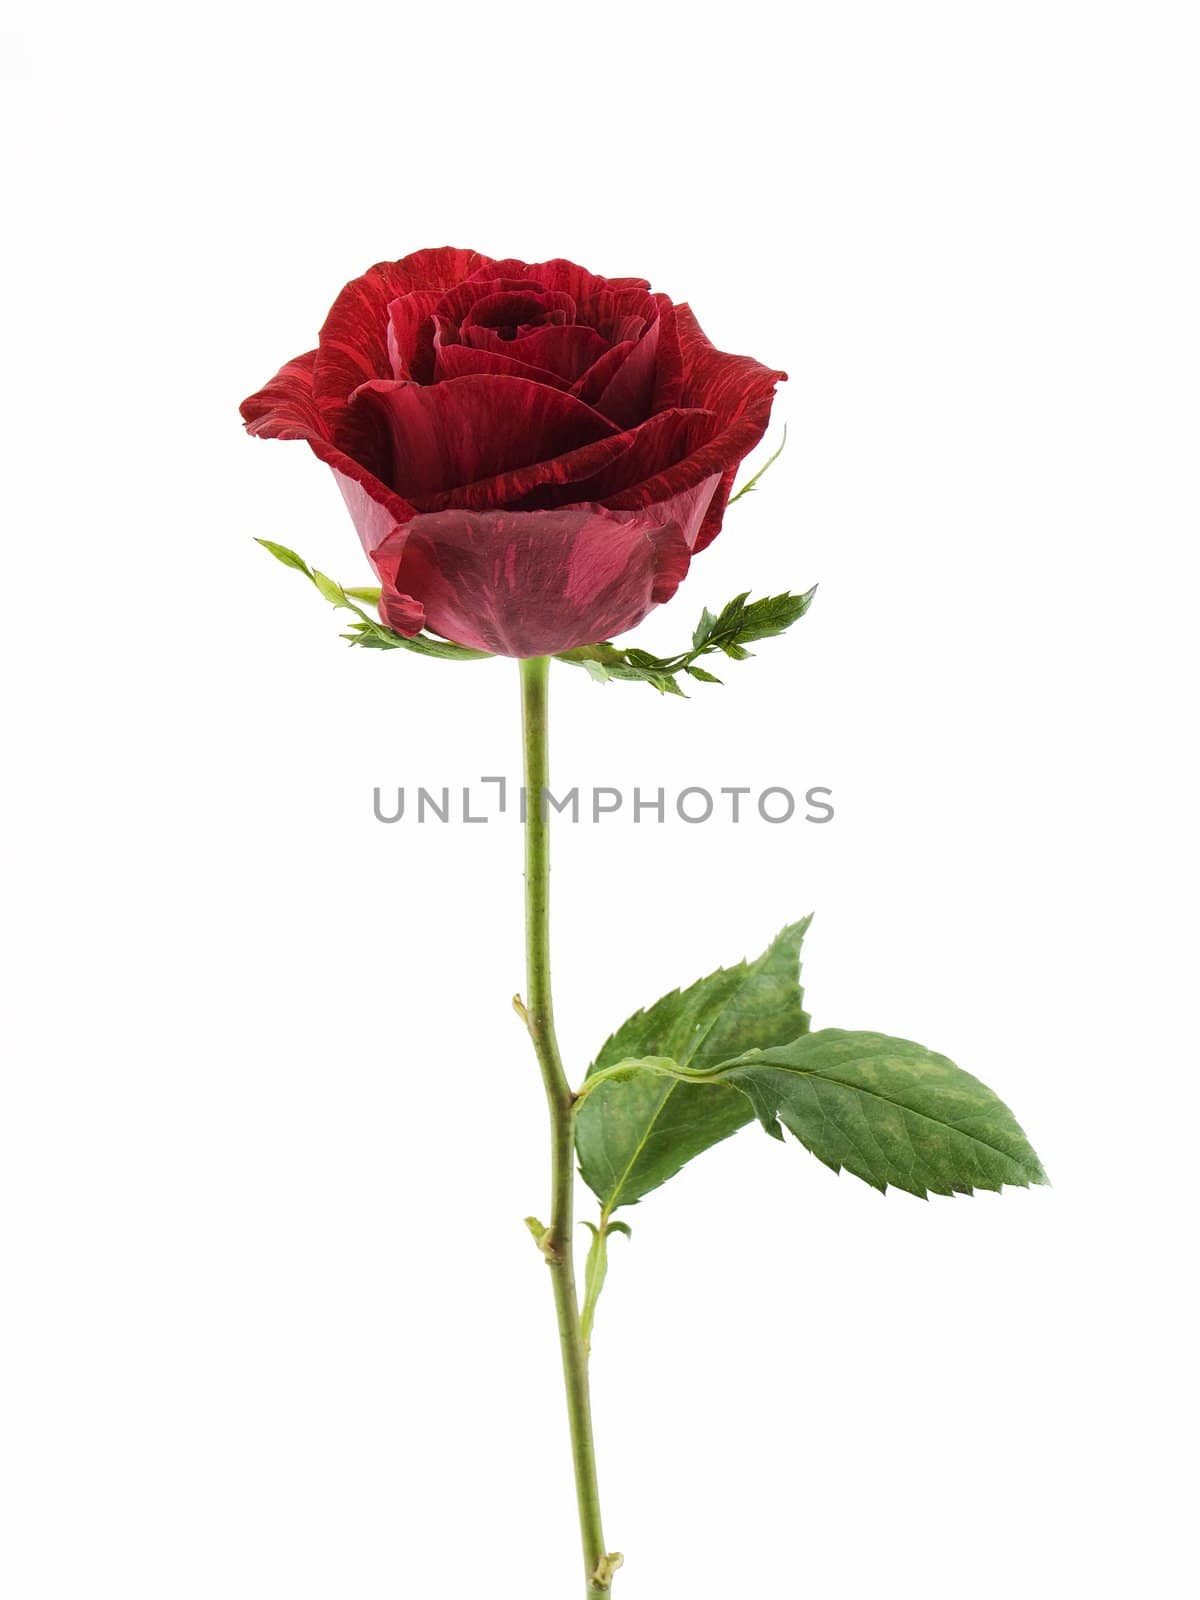 Hybrid red intuition rose isolated on a white background